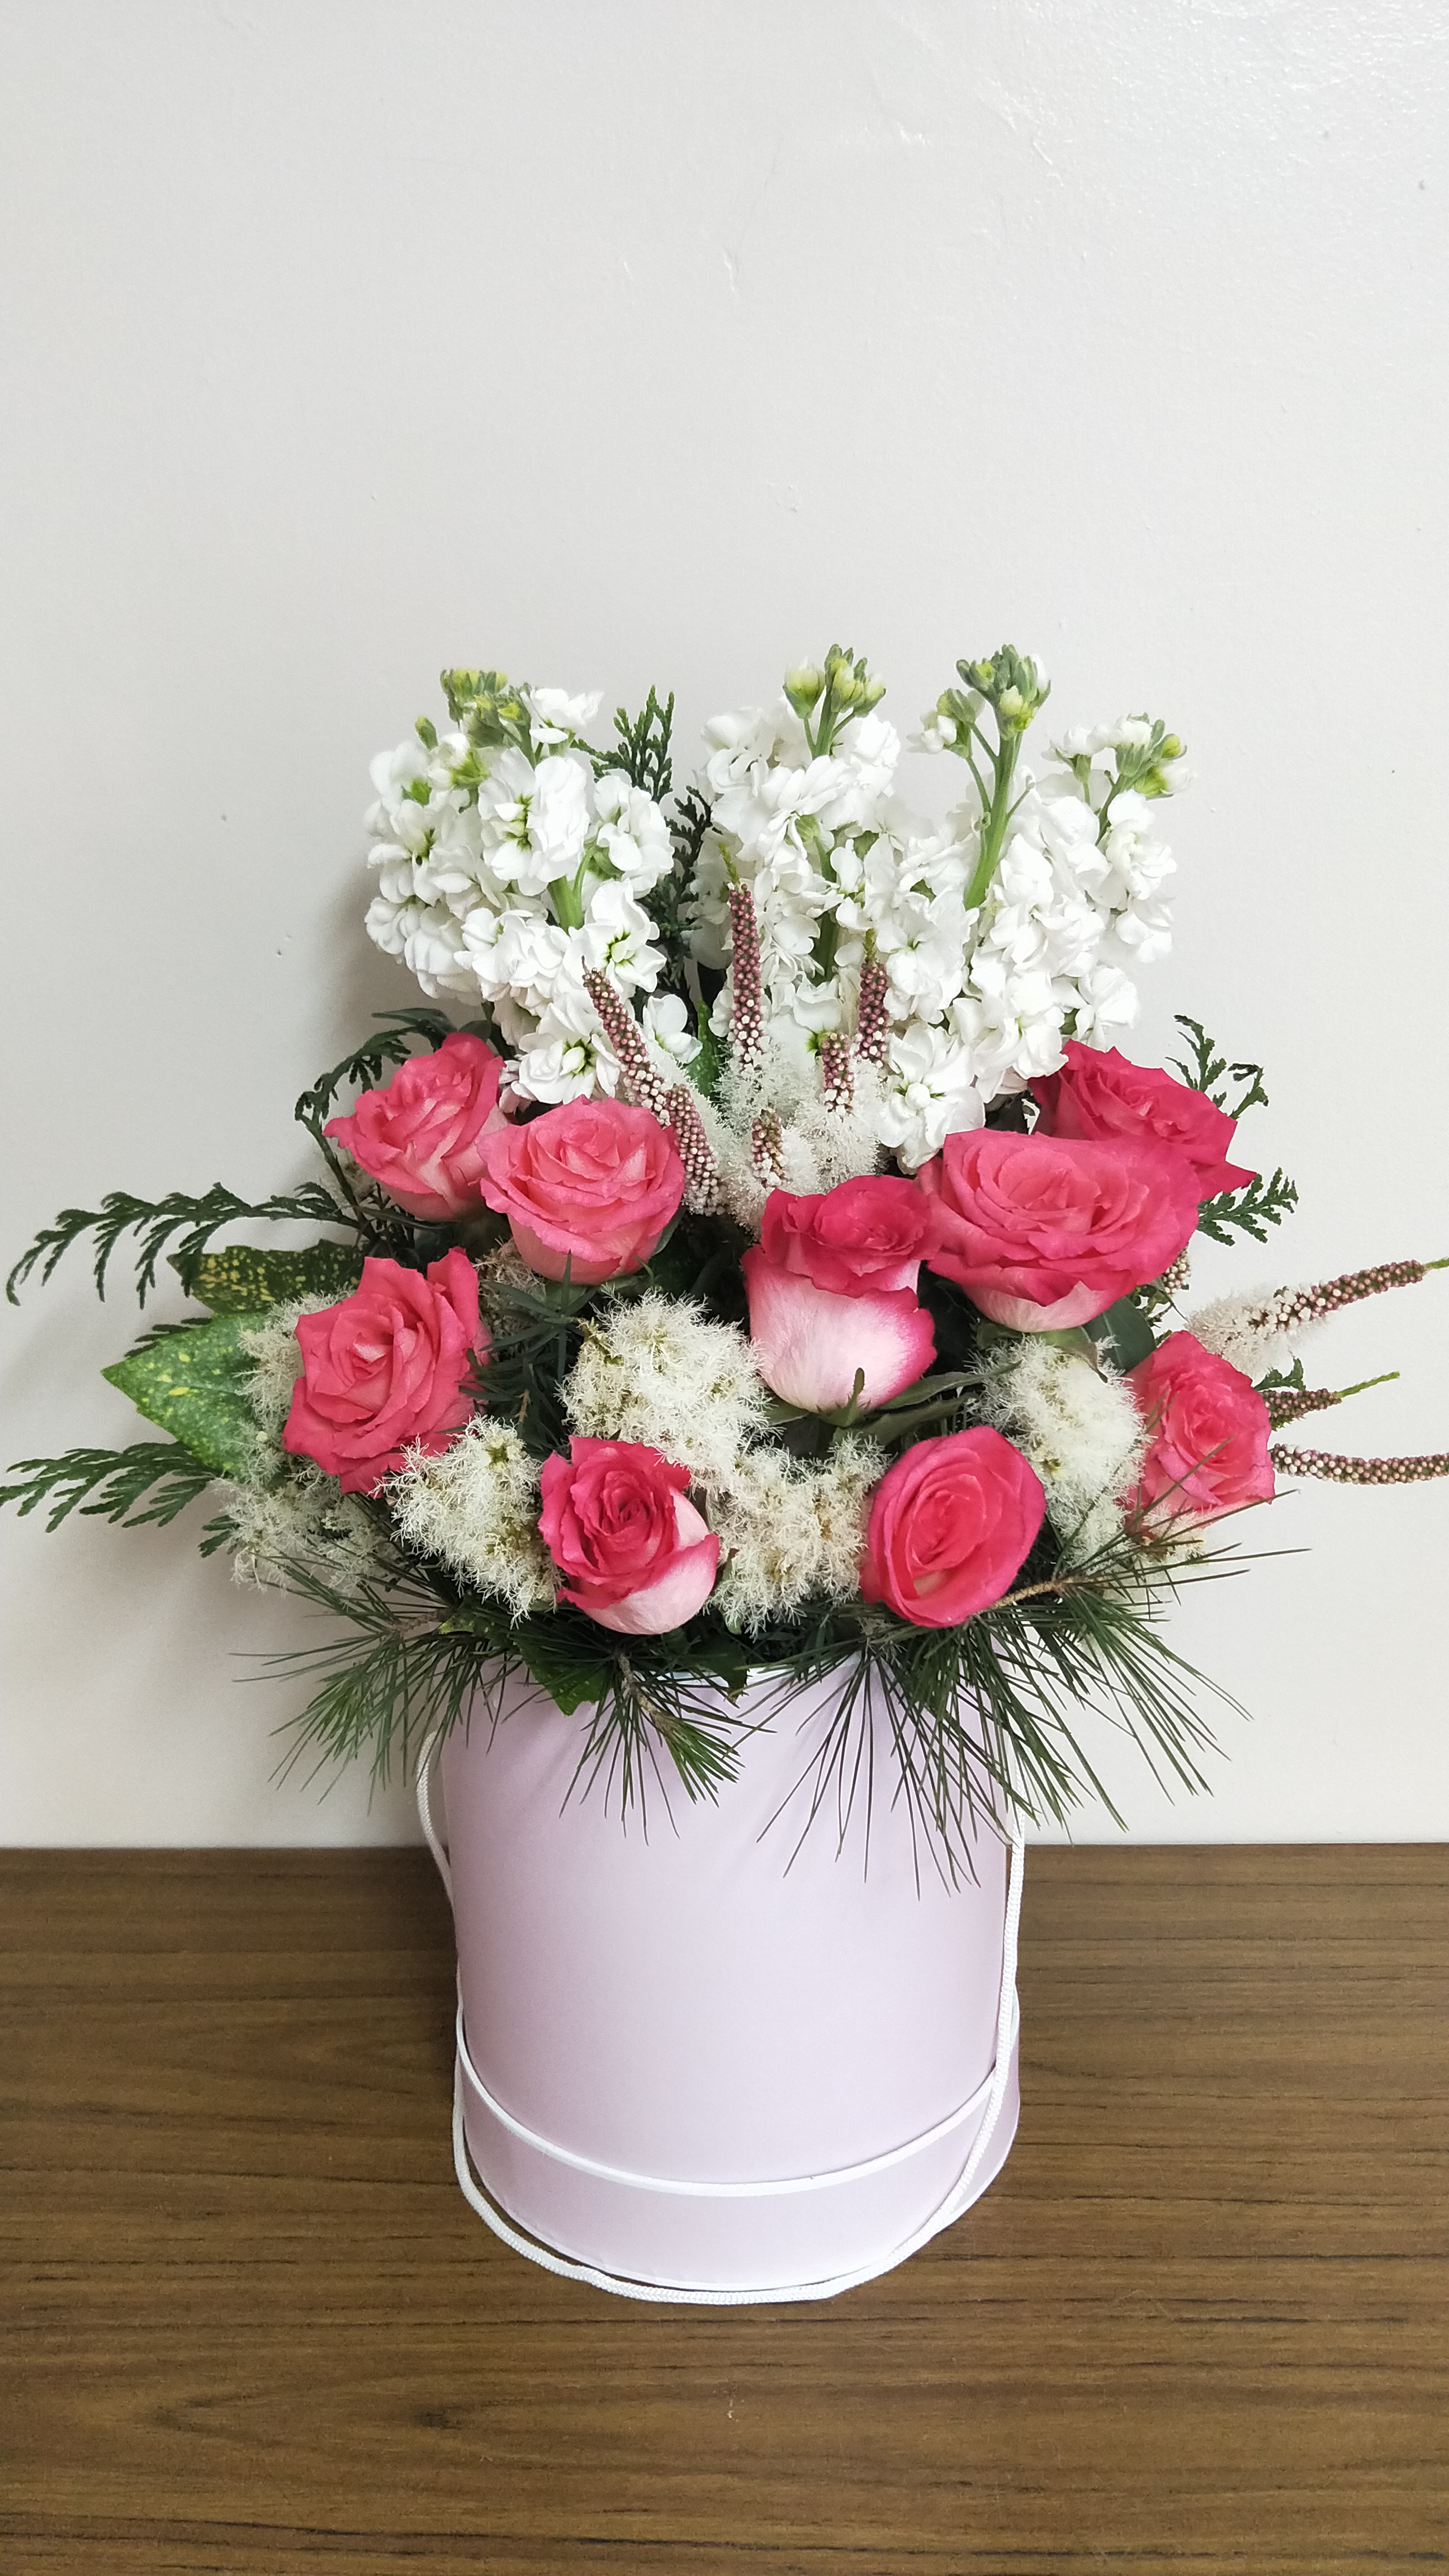 Bella hatbox arrangement makes an ideal gift for many occasions.